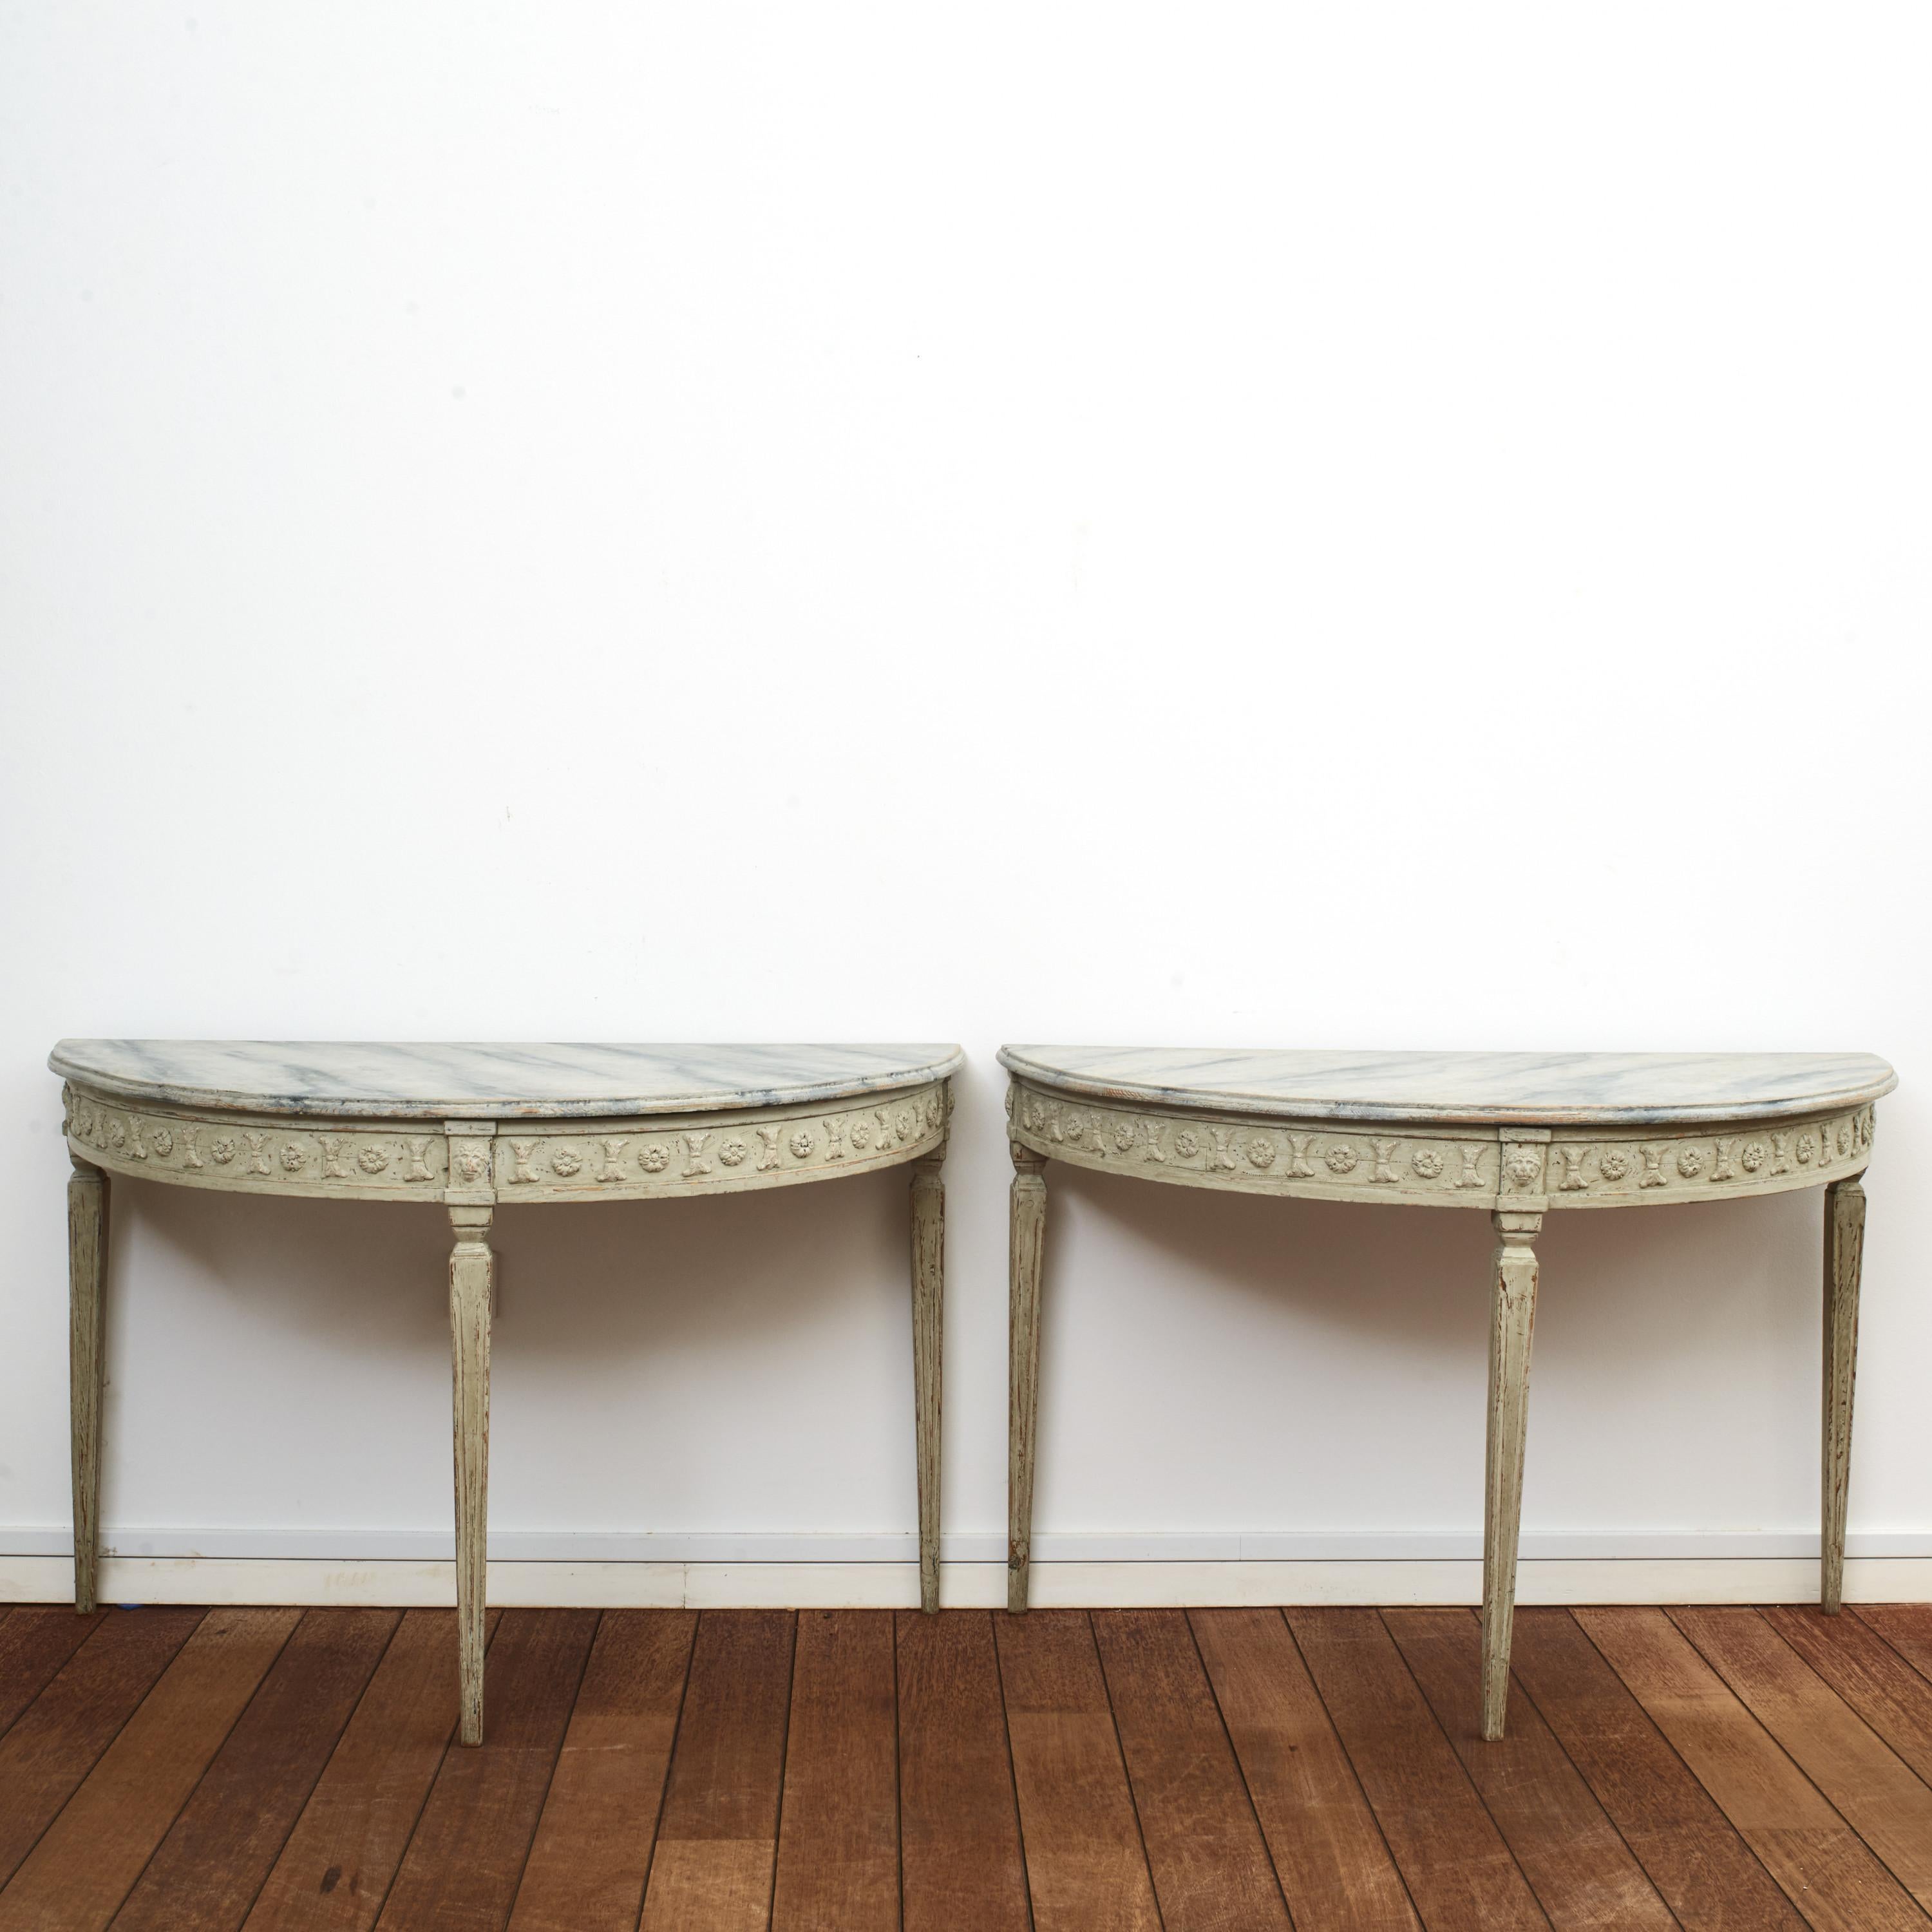 Pair of Swedish demilune Gustavian style console tables on tapered fluted legs.
Later professionally painted and decorated in light grey and blue shades.
Tabletop blue-gray marbled.
Sweden, circa 1840.